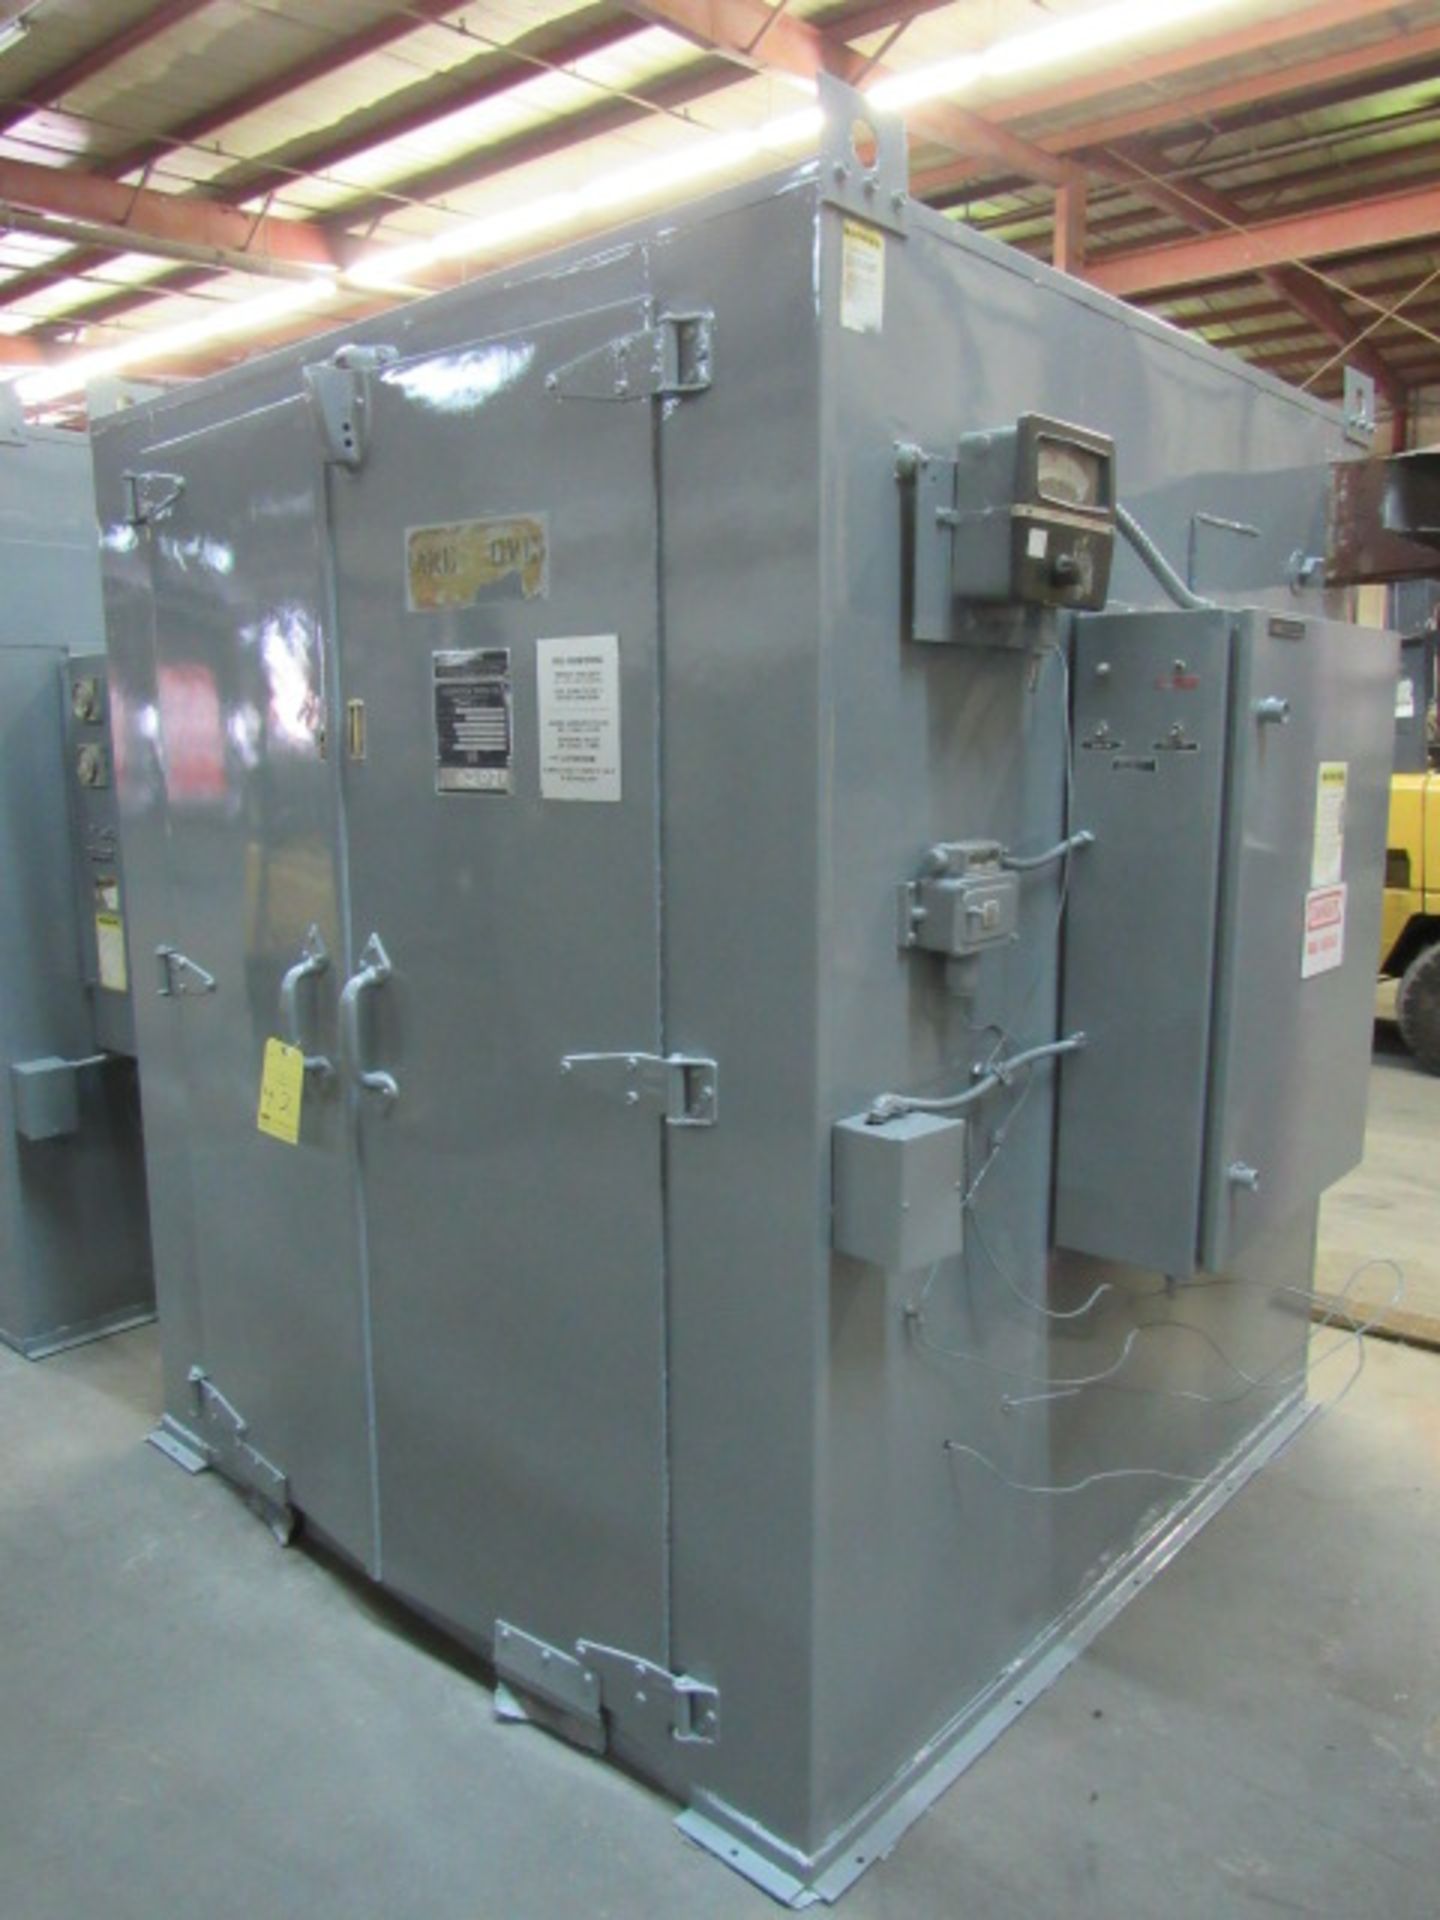 ELECTRIC BAKE OVEN, DESPATCH, 650 deg. F. max. temp., 48” x 48” x 60” ht. chamber (80 cu. ft.), - Image 3 of 4